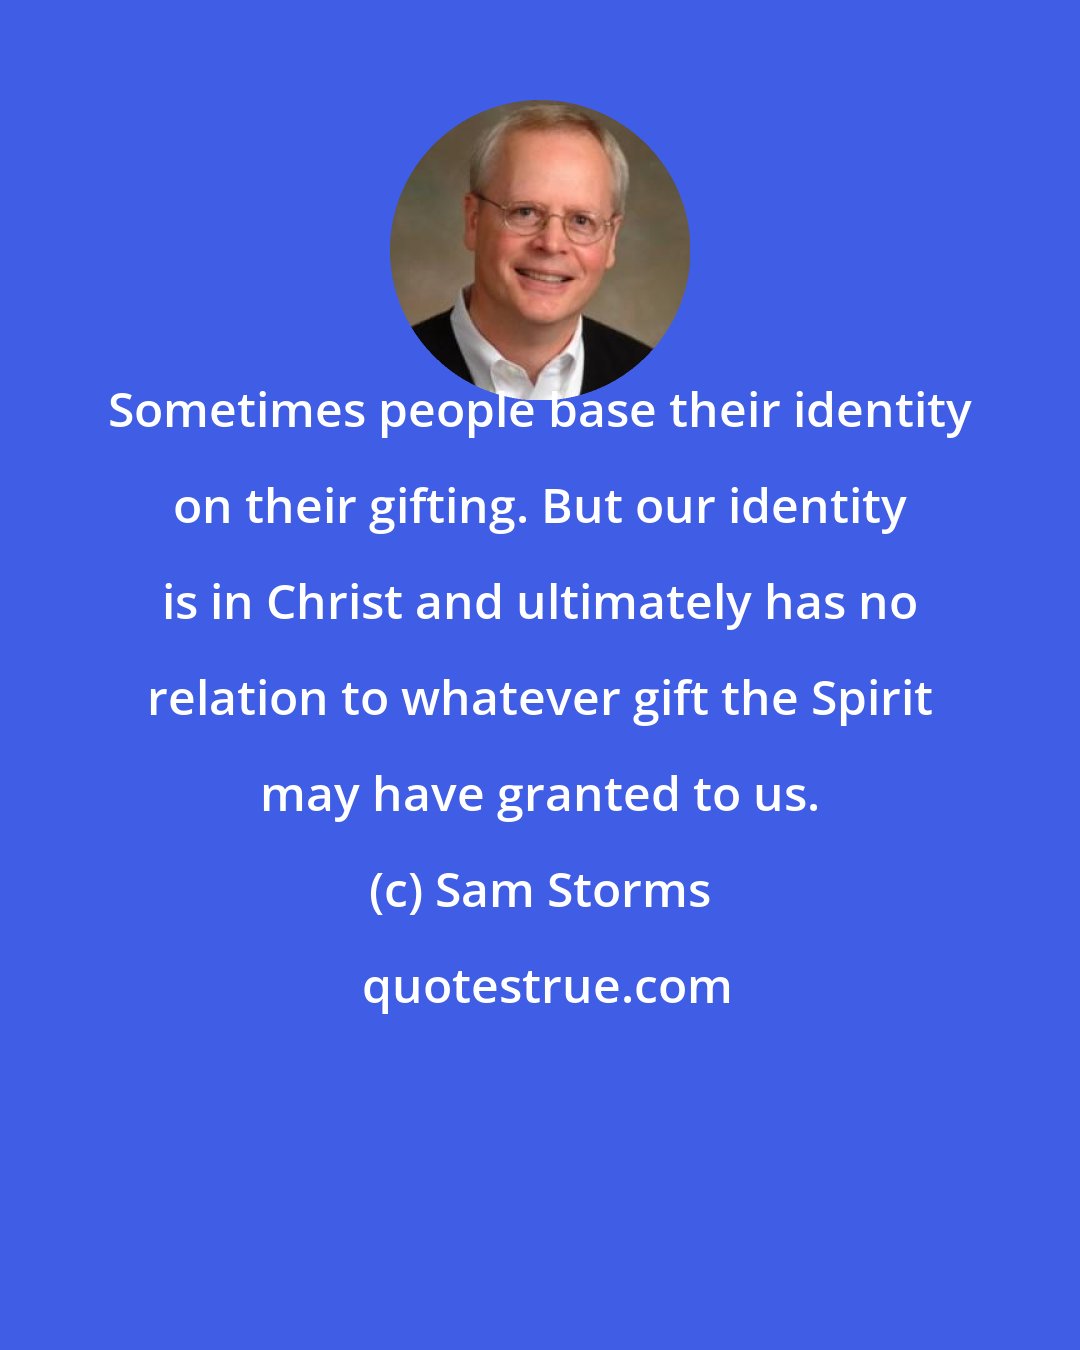 Sam Storms: Sometimes people base their identity on their gifting. But our identity is in Christ and ultimately has no relation to whatever gift the Spirit may have granted to us.